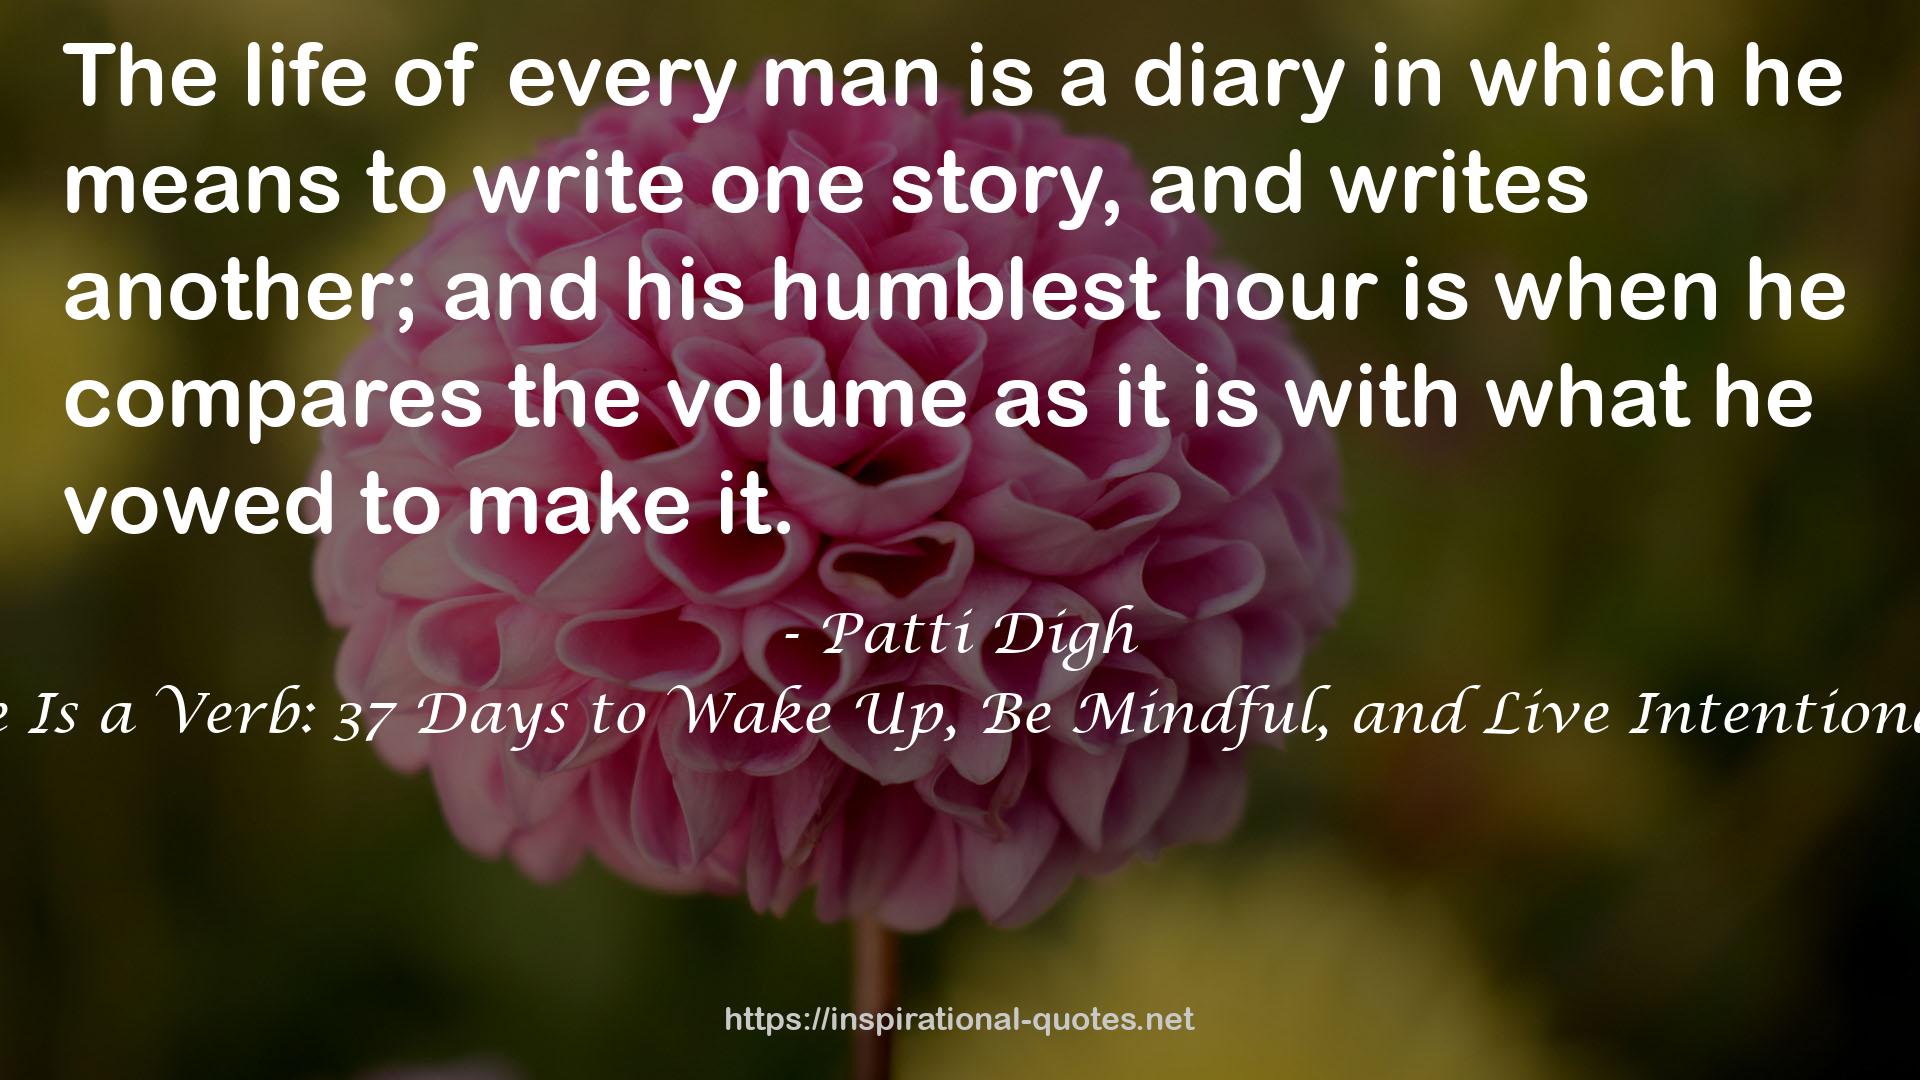 Life Is a Verb: 37 Days to Wake Up, Be Mindful, and Live Intentionally QUOTES